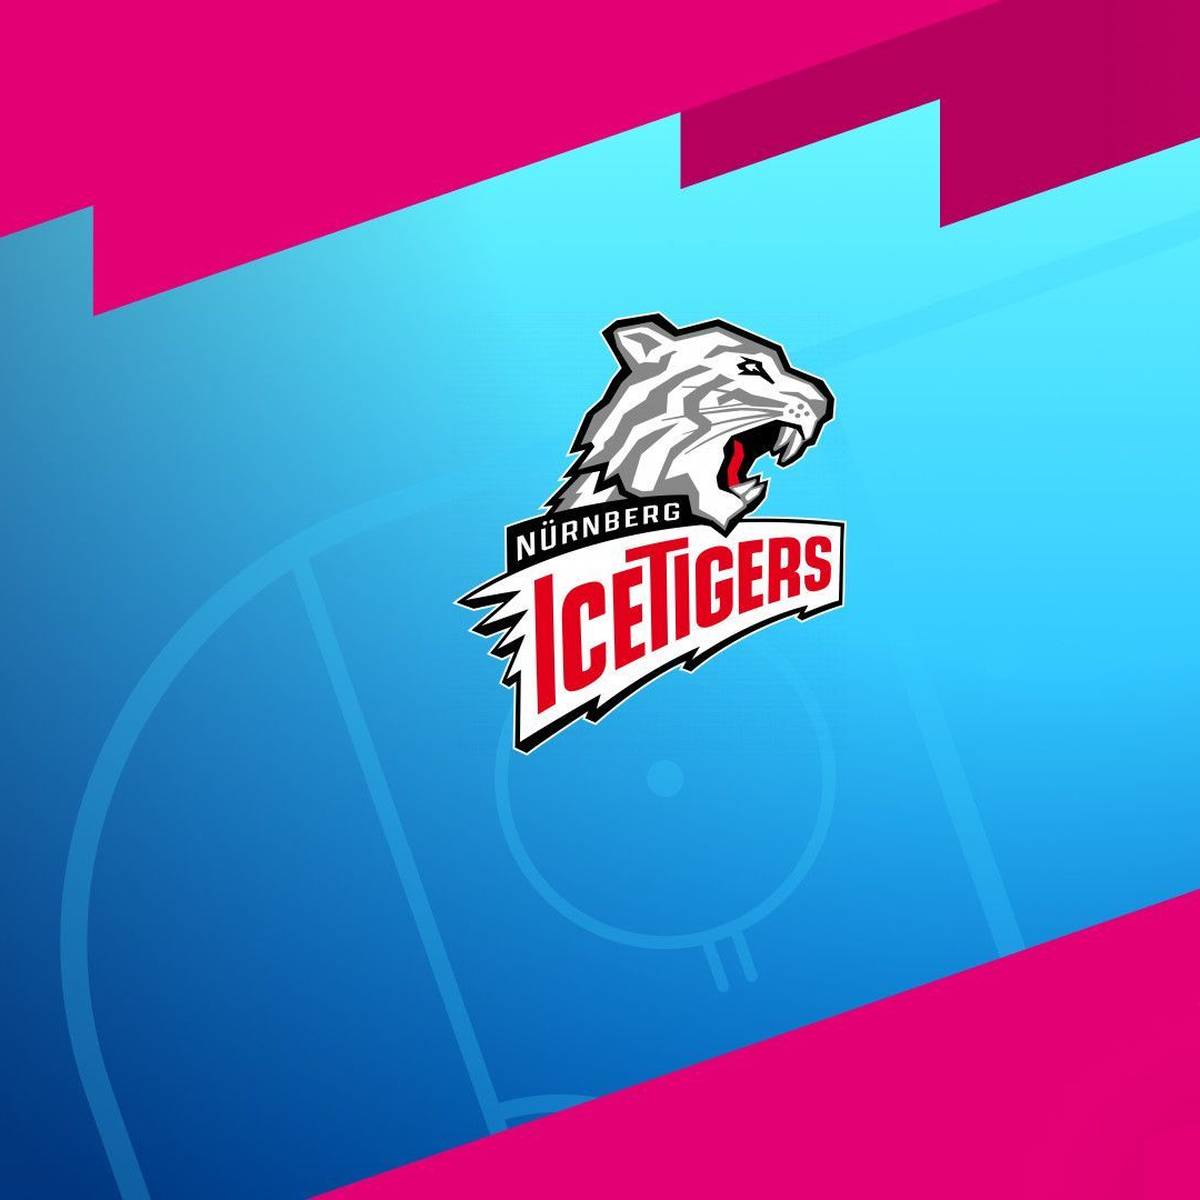 Nürnberg Ice Tigers - Augsburger Panther (Highlights)